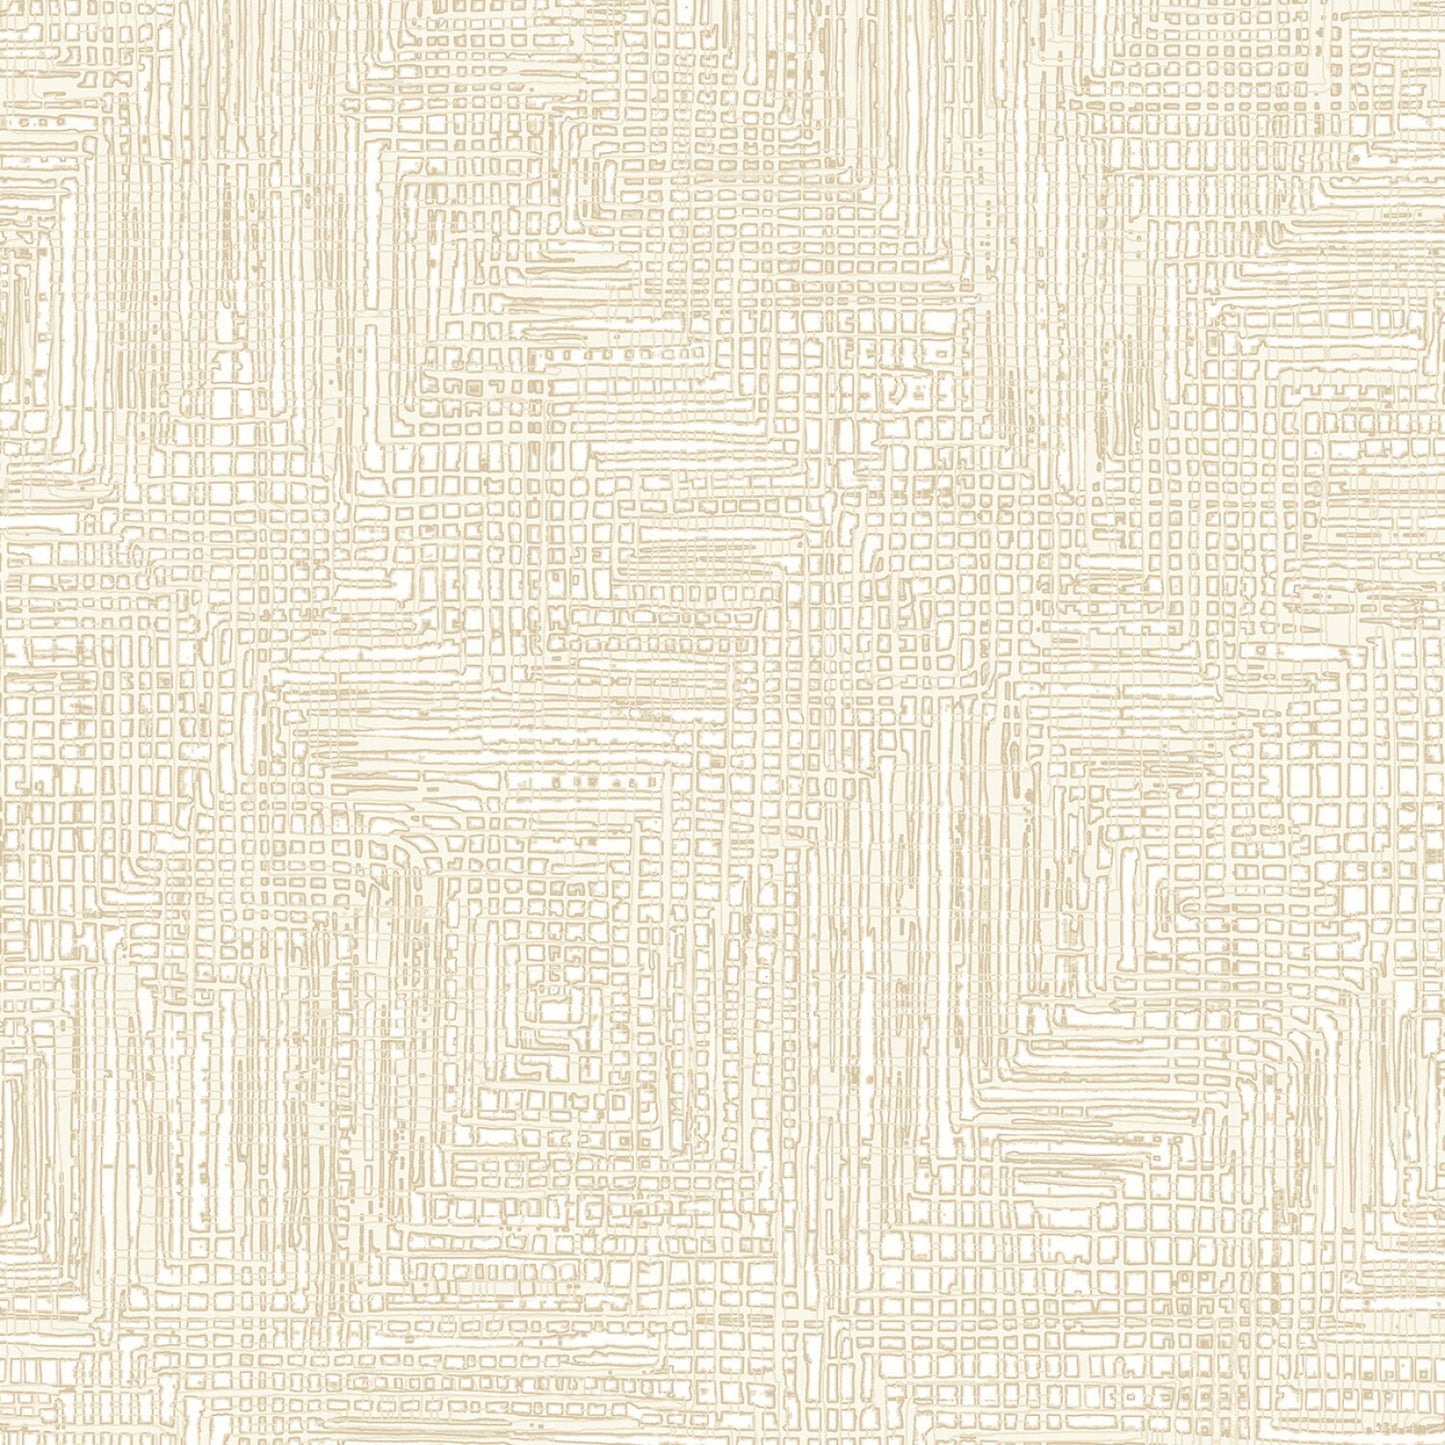 108" Grass Roots - Ecru Grasscloth Wide Quilt Back Fabric, P&B Textiles GROO04973-E, Cream Tonal Texture Wide Quilt Backing, By the Yard